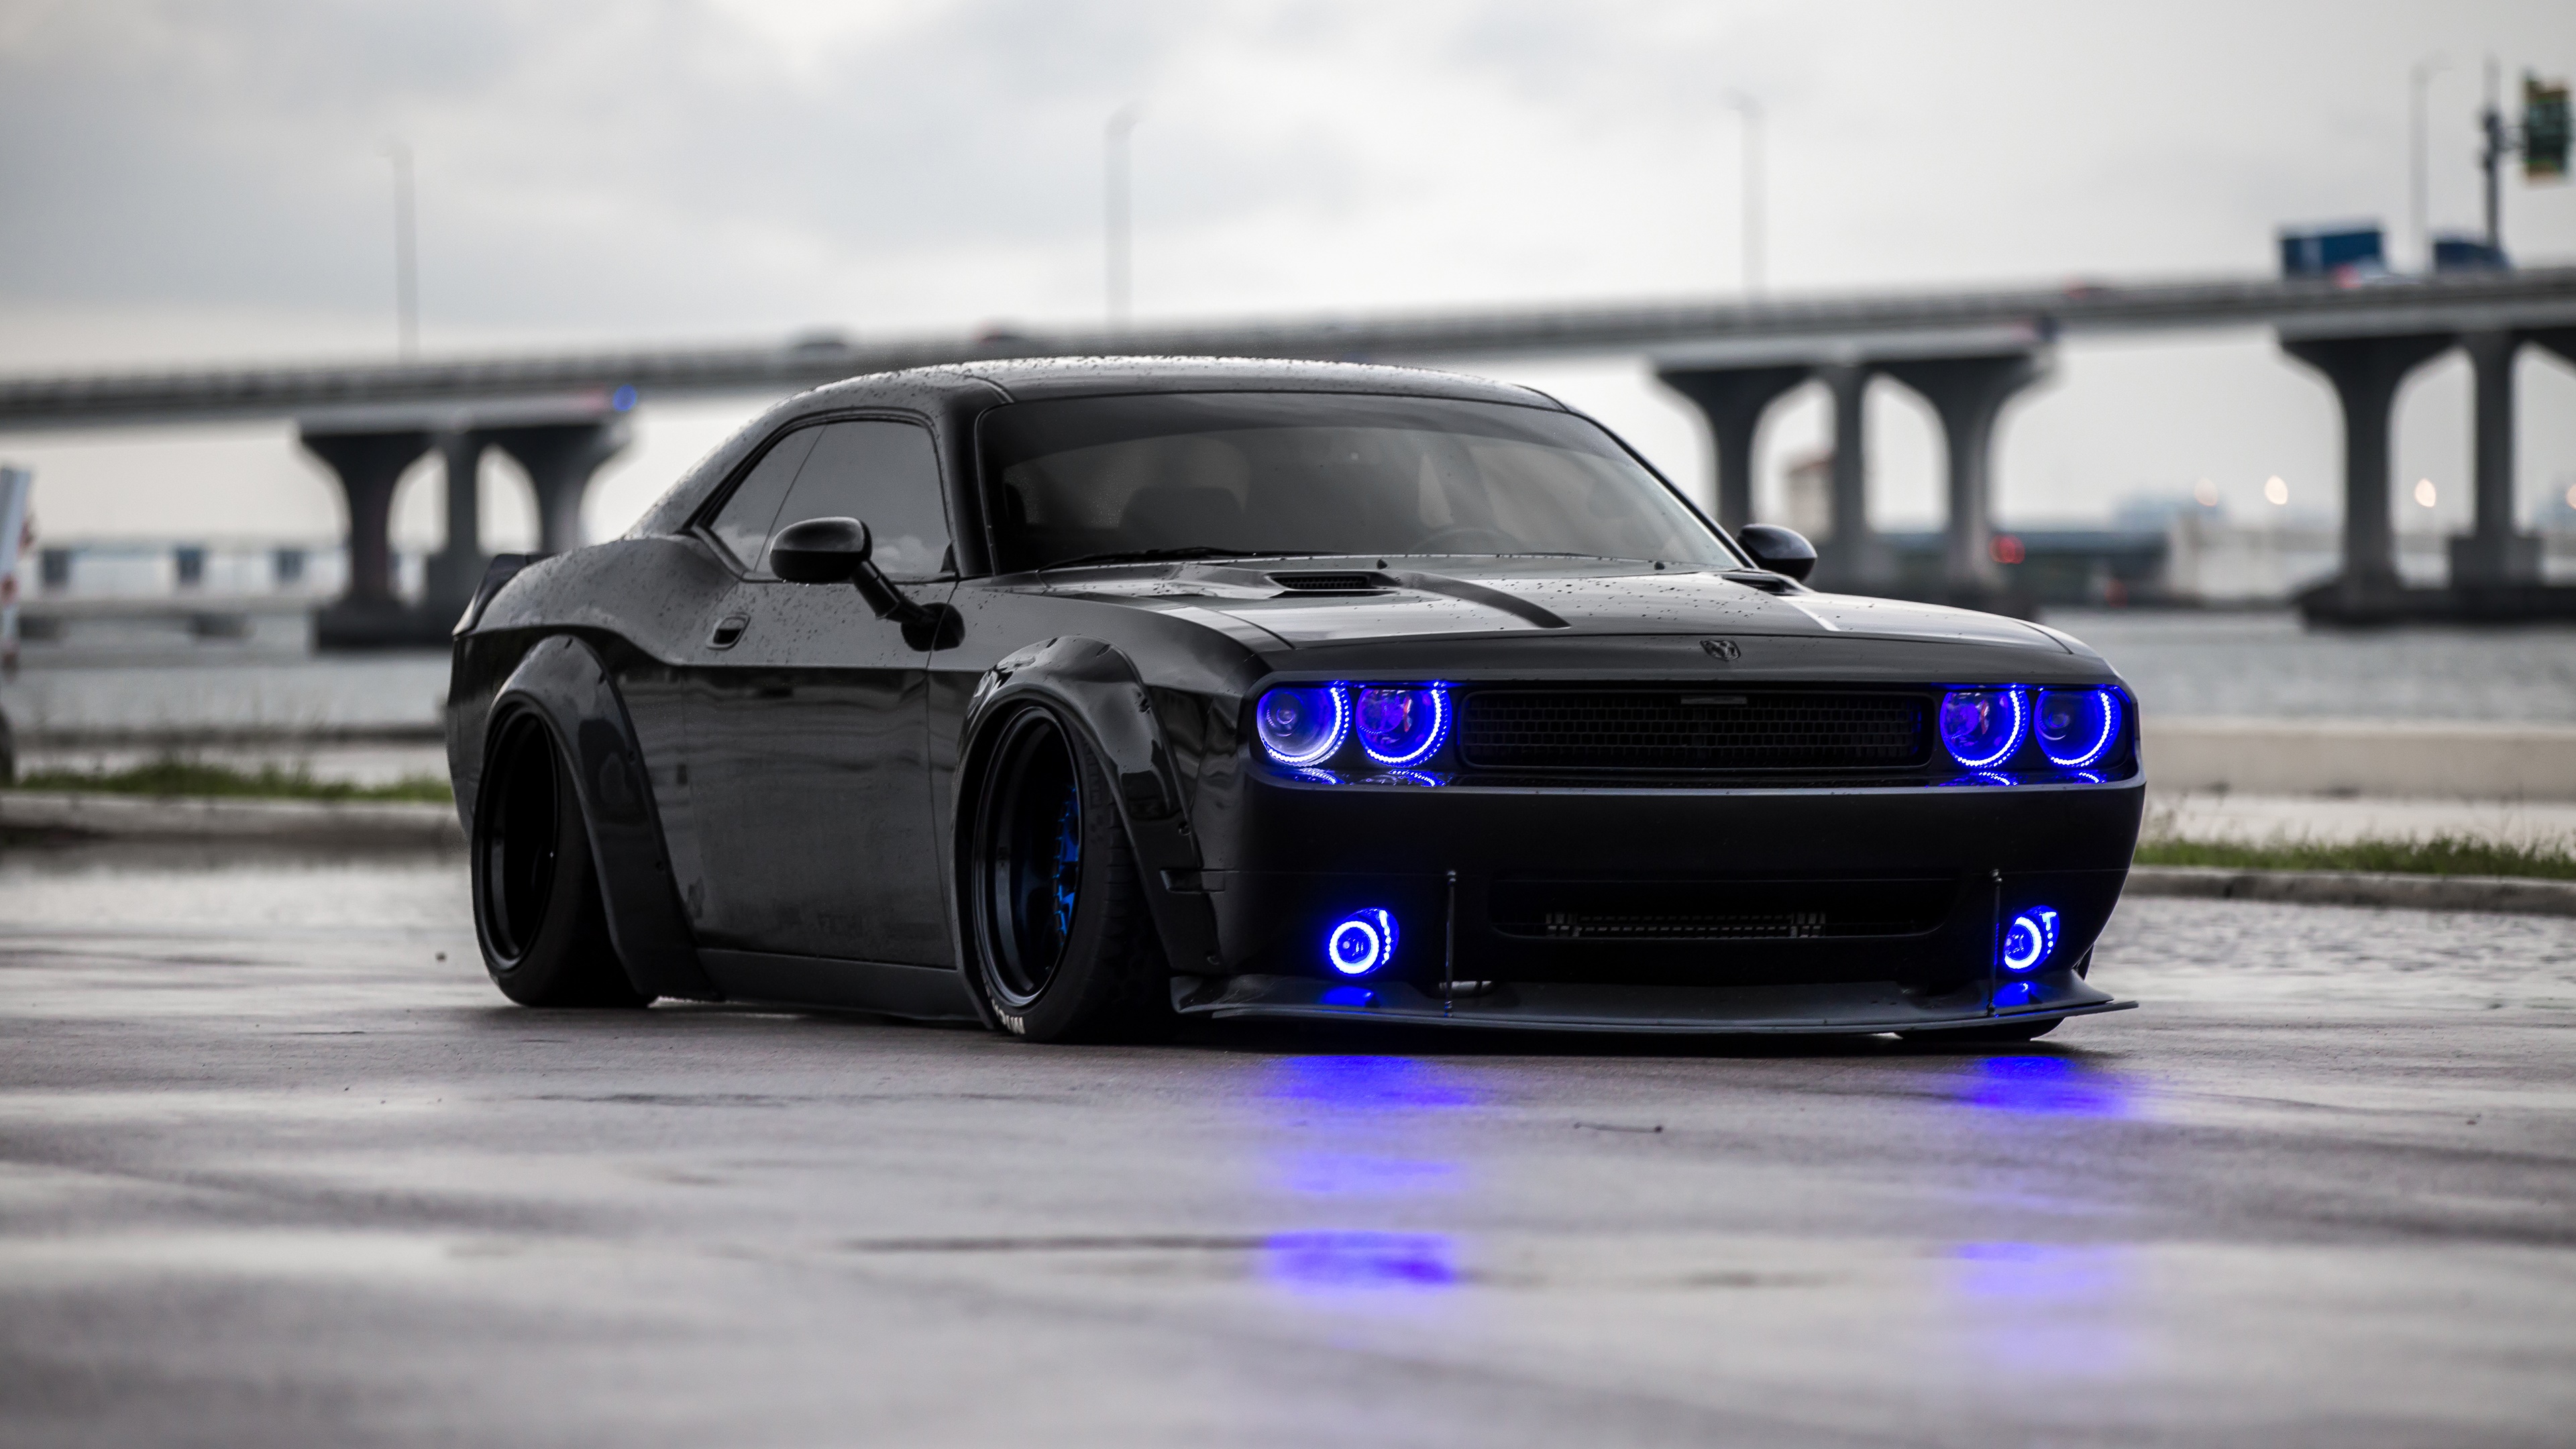 Awesome Dodge Challenger Wallpaper Free